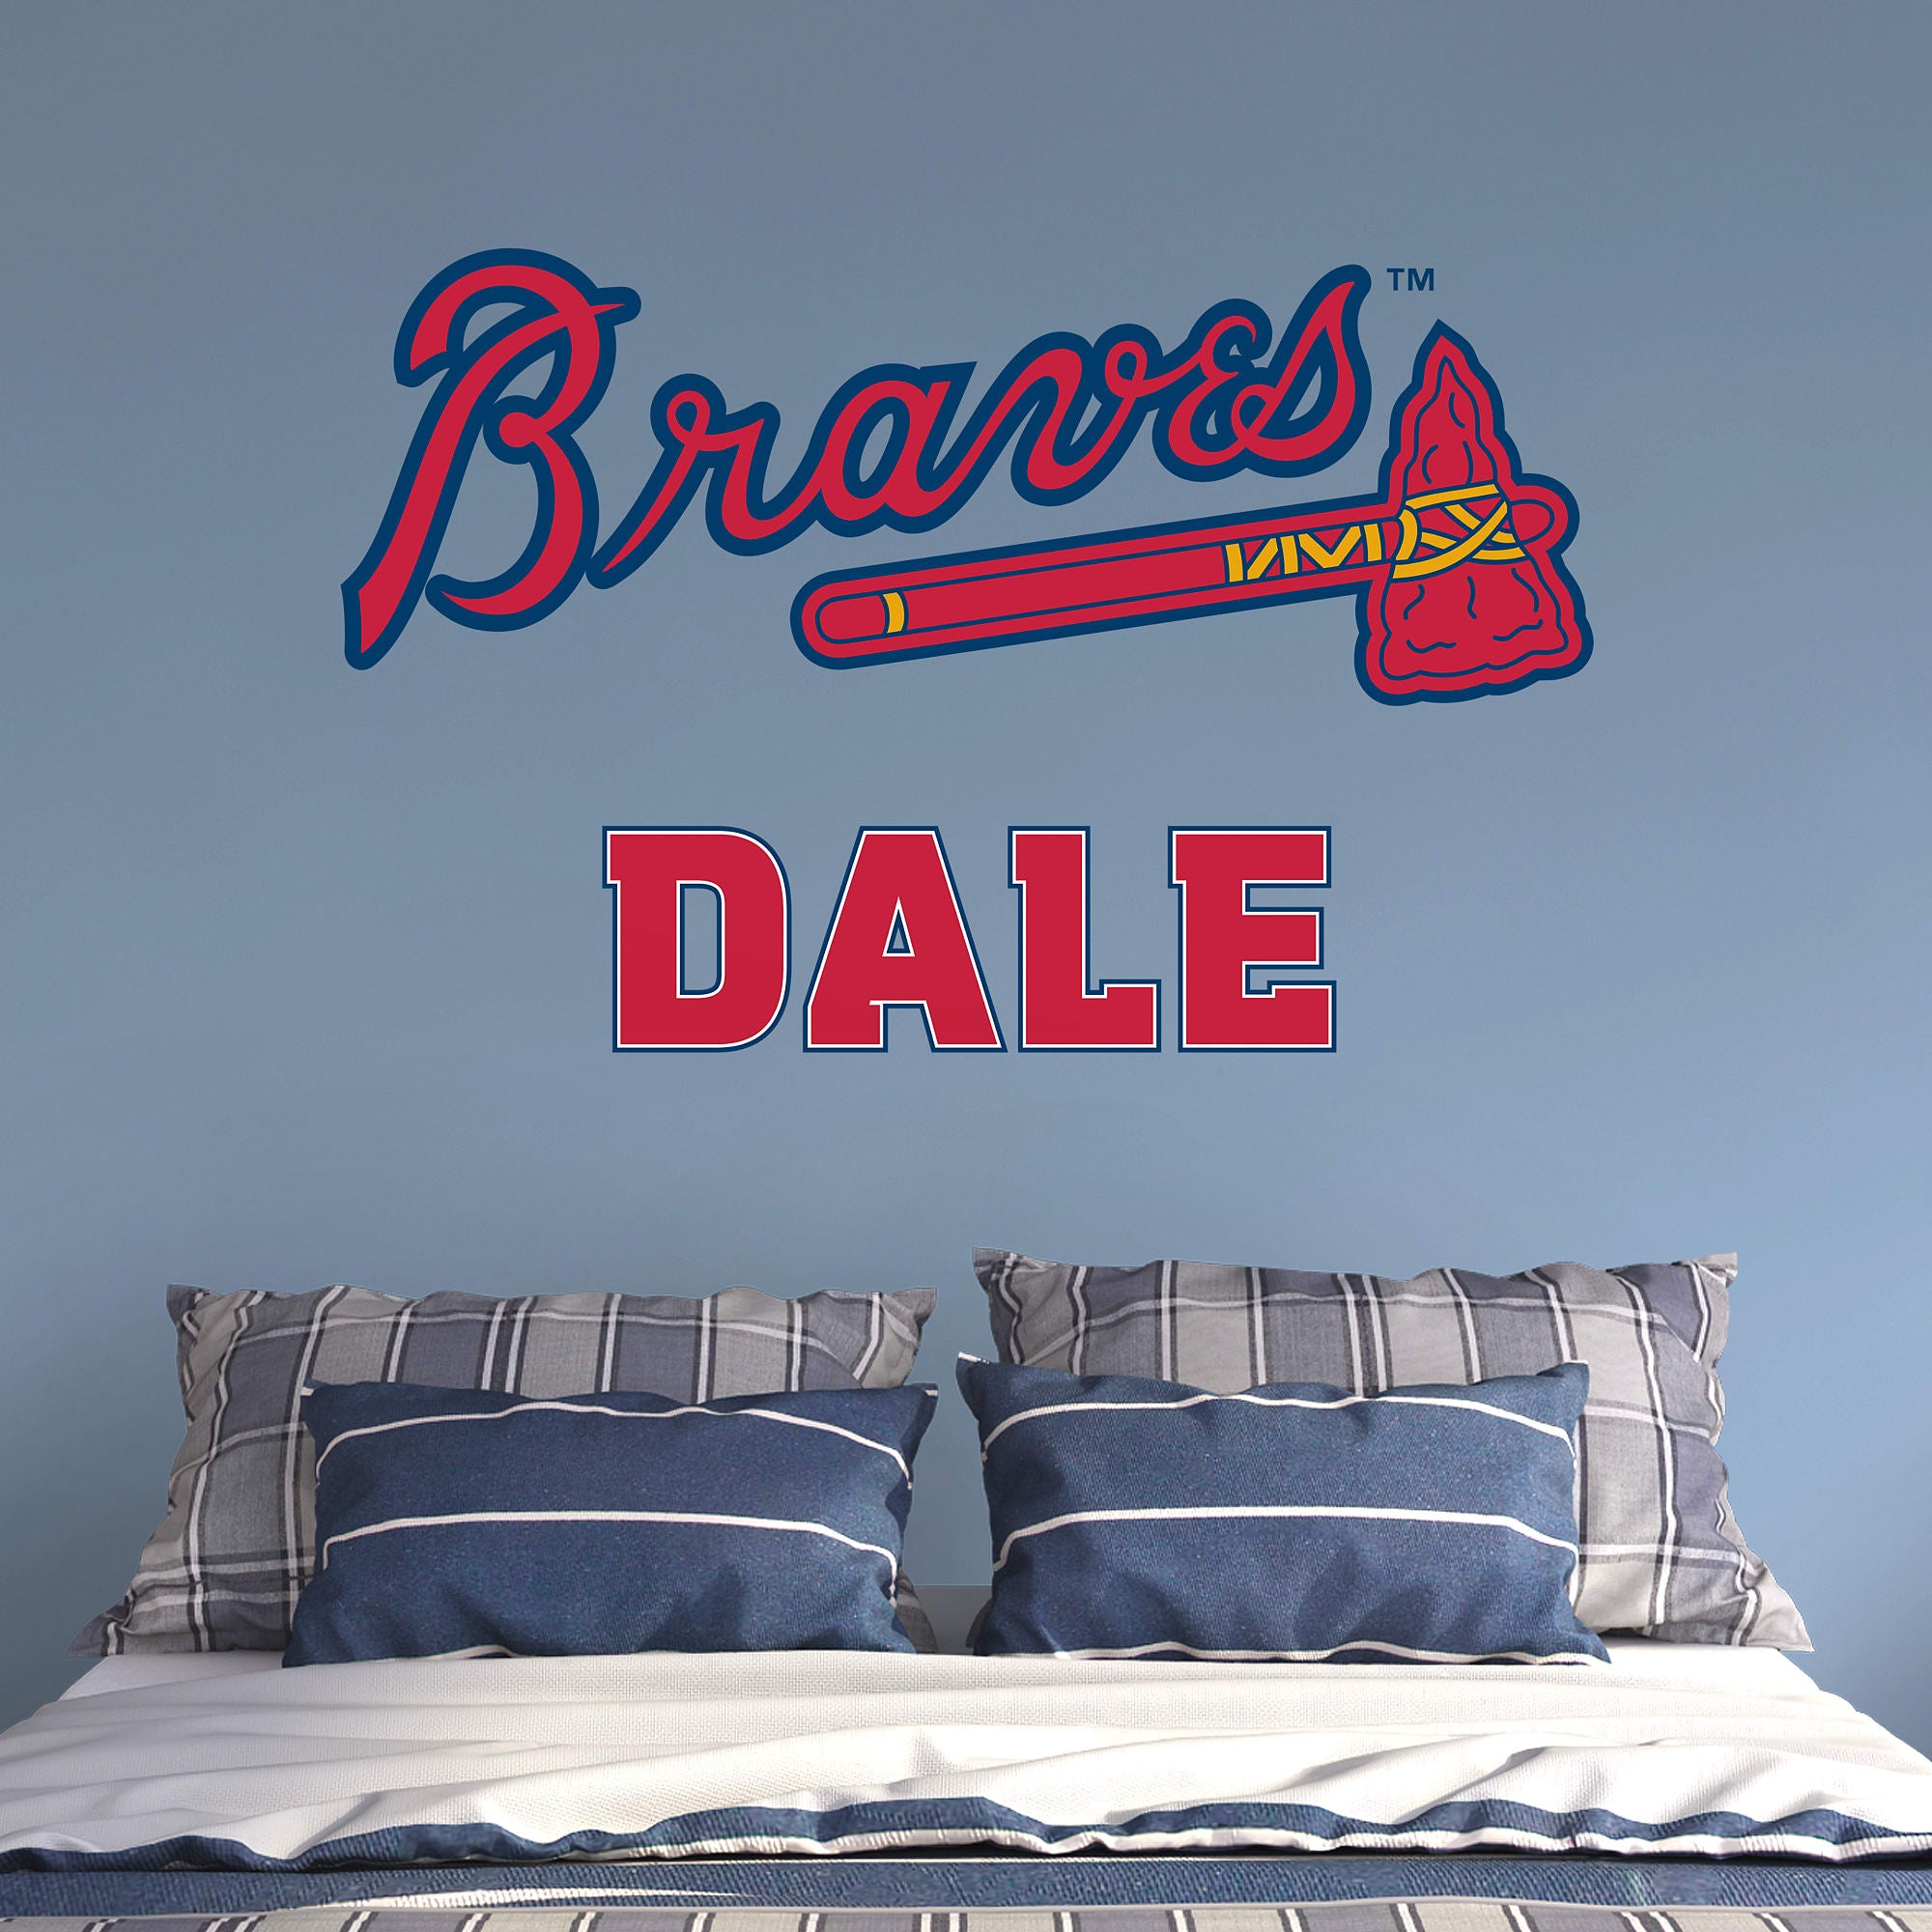 Atlanta Braves: Stacked Personalized Name - Officially Licensed MLB Transfer Decal in Red (52"W x 39.5"H) by Fathead | Vinyl